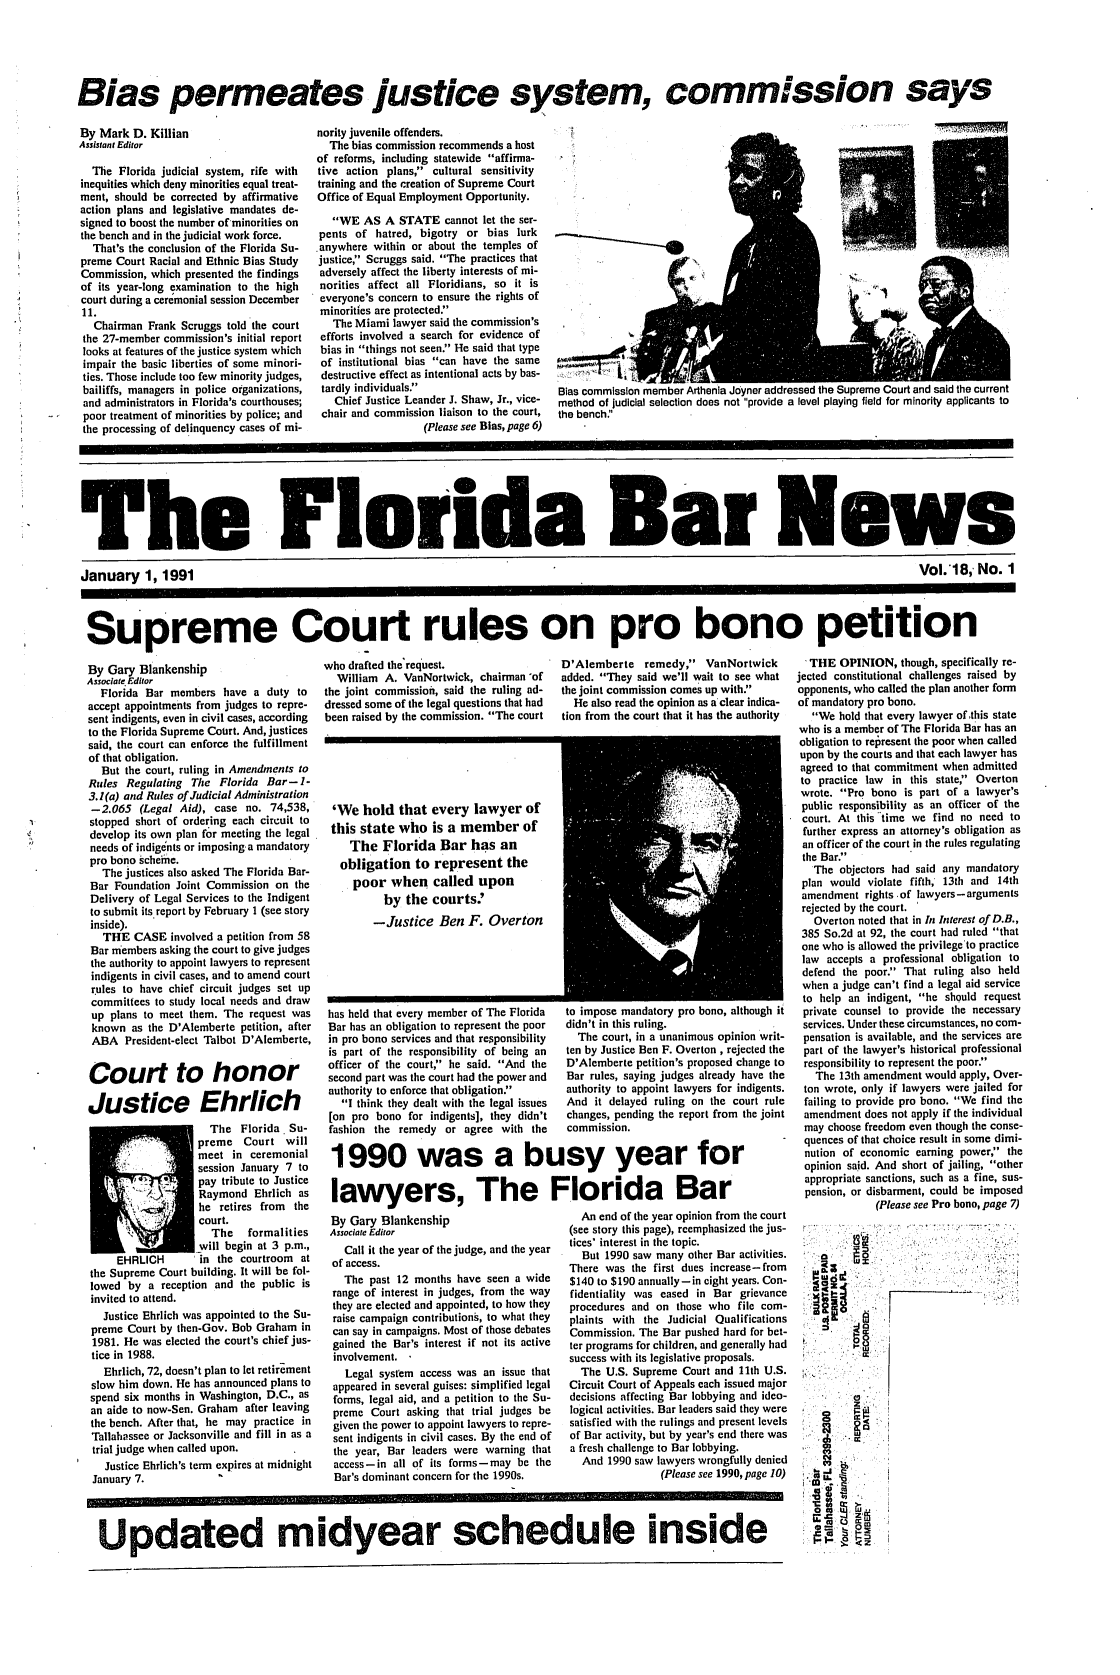 handle is hein.barjournals/flabn0018 and id is 1 raw text is: 






Bias permeates justice system, commssion says


By Mark D. Killian
Assistant Editor

  The Florida judicial system, rife with
inequities which deny minorities equal treat-
ment, should be corrected by affirmative
action plans and legislative mandates de-
signed to boost the number of minorities on
the bench and in the judicial work force.
  That's the conclusion of the Florida Su-
preme Court Racial and Ethnic Bias Study
Commission, which presented the findings
of its year-long examination to the high
court during a ceremonial session December
11.
   Chairman Frank Scruggs told the court
 the 27-member commission's initial report
 looks at features of the justice system which
 impair the basic liberties of some minori-
 ties. Those include too few minority judges,
 bailiffs, managers in police organizations,
 and administrators in Florida's courthouses;
 poor treatment of minorities by police; and
 the processing of delinquency cases of mi-


nority juvenile offenders.
  The bias commission recommends a host
of reforms, including statewide affirma-
tive action plans, cultural sensitivity
training and the creation of Supreme Court
Office of Equal Employment Opportunity.

   WE AS A STATE cannot let the ser-
 pents of hatred, bigotry or bias lurk
.anywhere within or about the temples of
justice, Scruggs said. The practices that
adversely affect the liberty interests of mi-
norities affect all Floridians, so it is
everyone's concern to ensure the rights of
minorities are protected:'
   The Miami lawyer said the commission's
 efforts involved a search for evidence of
 bias in things not seen. He said that type
 of institutional bias can have the same
 destructive effect as intentional acts by bas-
 tardly individuals.
   Chief Justice Leander J. Shaw, Jr., vice-
 chair and commission liaison to the court,
                   (Please see Bias, page 6)


Bias commission member Arthenla Joyner addressed the Supreme Court and said the current
method of judicial selection does not provide a level playing field for minority applicants to
the bench:'


The Florida Bar News

January 1, 1991                                                                                                                                   Vol.-18, No. 1




Supreme Court rules on pro bono petition


By Gary Blankenship
Associate Editor
  Florida Bar members have a duty to
accept appointments from judges to repre-
sent indigents, even in civil cases, according
to the Florida Supreme Court. And, justices
said, the court can enforce the fulfillment
of that obligation.
   But the court, ruling in Amendments to
Rules Regulating Te Florida Bar-l-
3.7(a) and Rules of Judicial Administration
-2.065 (Legal Aid), case no. 74,538,
stopped short of ordering each circuit to
develop its own plan for meeting the legal
needs of indigents or imposing a mandatory
pro bono scheine.
   The justices also asked The Florida Bar-
 Bar Foundation Joint Commission on the
 Delivery of Legal Services to the Indigent
 to submit its.report by February 1 (see story
 inside).
   THE CASE involved a petition from 58
 Bar members asking the court to give judges
 the authority to appoint lawyers to represent
 indigents in civil cases, and to amend court
 rules to have chief circuit judges set up
 committees to study local needs and draw


who drafted the'request.
  William A. VanNortwick, chairman of
the joint commission, said the ruling ad-
dressed some of the legal questions that had
been raised by the commission. The court


D'Alemberte remedy, VanNortwick
added. They said we'll wait to see what
the joint commission comes up with.
  He also read the opinion as a clear indica-
tion from the court that it has the authority


'We hold that every lawyer of
this state who is a member of
   The Florida Bar has an
   obligation to represent the
   poor when called upon
         by the courts.
       -Justice Ben F. Overton


up plans to meet them. The request was    has held that every member of The Florida to impose mandatory pro bono, altt
known as the D'Alemberte petition, after  Bar has an obligation to represent the poor  didn't in this ruling.
ABA President-elect Talbot D'Alemberte,   in pro bono services and that responsibility  The court, in a unanimous opinic
                                          is part of the responsibility of being an ten by Justice Ben F. Overton , reje.
                                          officer of the court, he said. And the D'Alemberte petition's proposed cl
                                          osecondpart was the court had the power and  Bar rules, saying judges already h
                             E ri         authority to enforce that obligation.'   authority to appoint lawyers for in
Justice                hrlch                I think they dealt with the legal issues And it delayed ruling on the co,
                                          [on pro bono for indigents], they didn't changes, pending the report from t
                     The Florida Su-      fashion the remedy or agree with the     commission.
                   preme   Court will
                   meet in ceremonial1990                was           a
                   session January 7 to
                   pay tribute to Justice
                   p        eRaymond Ehrlich as lawyers            The Florida Bar
                   he retires from  the                  ee
                   court.                 By Gary Blankenship                         An end of the year opinion from t
                     The    formalities   Associate Editor                         (see story this page), reemphasized


             /wll begin at 3 pm.,
     EHRLICH       in the courtroom  at
the Supreme Court building. It will be fol-
lowed by a reception and the public is
invited to attend.
  Justice Ehrlich was appointed to the Su-
preme Court by then-Gov. Bob Graham in
1981. He was elected the court's chief jus-
tice in 1988.
  Ehrlich, 72, doesn't plan to let retirement
slow him down. He has announced plans to
spend six months in Washington, D.C., as
an aide to now-Sen. Graham after leaving
the bench. After that, he may practice in
Tallahassee or Jacksonville and fill in as a
trial judge when called upon.
   Justice Ehrlich's term expires at midnight
January 7.


  Call it the year of the judge, and the year
of access.
  The past 12 months have seen a wide
range of interest in judges, from the way
they are elected and appointed, to how they
raise campaign contributions, to what they
can say in campaigns. Most of those debates
gained the Bar's interest if not its active
involvement.
  Legal system access was an issue that
appeared in several guises: simplified legal
forms, legal aid, and a petition to the Su-
preme Court asking that trial judges be
given the power to appoint lawyers to repre-
sent indigents in civil cases. By the end of
the year, Bar leaders were warning that
access-in all of its forms-may be the
Bar's dominant concern for the 1990s.


Iougn it
on writ-
cted the
ange to
have the
digents.
urt rule
he joint


the court
the jus-


tices' interest in the topic.
  But 1990 saw many other Bar activities.
There was the first dues increase-from
$140 to $190 annually-in eight years. Con-
fidentiality was eased in Bar grievance
procedures and on those who file com-
plaints with the Judicial Qualifications
Commission. The Bar pushed hard for bet-
ter programs for children, and generally had
success with its legislative proposals.
  The U.S. Supreme Court and 11th U.S.
Circuit Court of Appeals each issued major
decisions affecting Bar lobbying and ideo-
logical activities. Bar leaders said they were
satisfied with the rulings and present levels
of Bar activity, but by year's end there was
a fresh challenge to Bar lobbying.
  And 1990 saw lawyers wrongfully denied
                (Please see 1990, page 10)


  , THE OPINION, though, specifically re-
jected constitutional challenges raised by
opponents, who called the plan another form
of mandatory pro bono.
   We hold that every lawyer of this state
who is a member of The Florida Bar has an
obligation to retresent the poor when called
upon by the courts and that each lawyer has
agreed to that commitment when admitted
to practice law in this state, Overton
wrote. Pro bono is part of a lawyer's
public responsibility as an officer of the
court. At this time we find no need to
further express an attorney's obligation as
an officer of the court in the rules regulating
the Bar.
   The objectors had said any mandatory
 plan would violate fifth, 13th and 14th
 amendment rights .of lawyers-arguments
 rejected by the court.
   Overton noted that in In Interest of D.B.,
 385 So.2d at 92, the court had ruled that
 one who is allowed the privilege to practice
 law accepts a professional obligation to
 defend the poor. That ruling also held
 when a judge can't find a legal aid service
 to help an indigent, he should request
 private counsel to provide the necessary
 services. Under these circumstances, no com-
 pensation is available, and the services are
 part of the lawyer's historical professional
 responsibility to represent the poor.
   The 13th amendment would apply, Over-
 ton wrote, only if lawyers were jailed for
 failing to provide pro bono. We find the
 amendment does not apply if the individual
 may choose freedom even though the conse-
 quences of that choice result in some dimi-
 nution of economic earning power, the
 opinion said. And short of jailing, other
 appropriate sanctions, such as a fine, sus-
 pension, or disbarment, could be imposed
              (Please see Pro bono, page 7)


      IL)










ix;1


Updated midyear schedule inside


